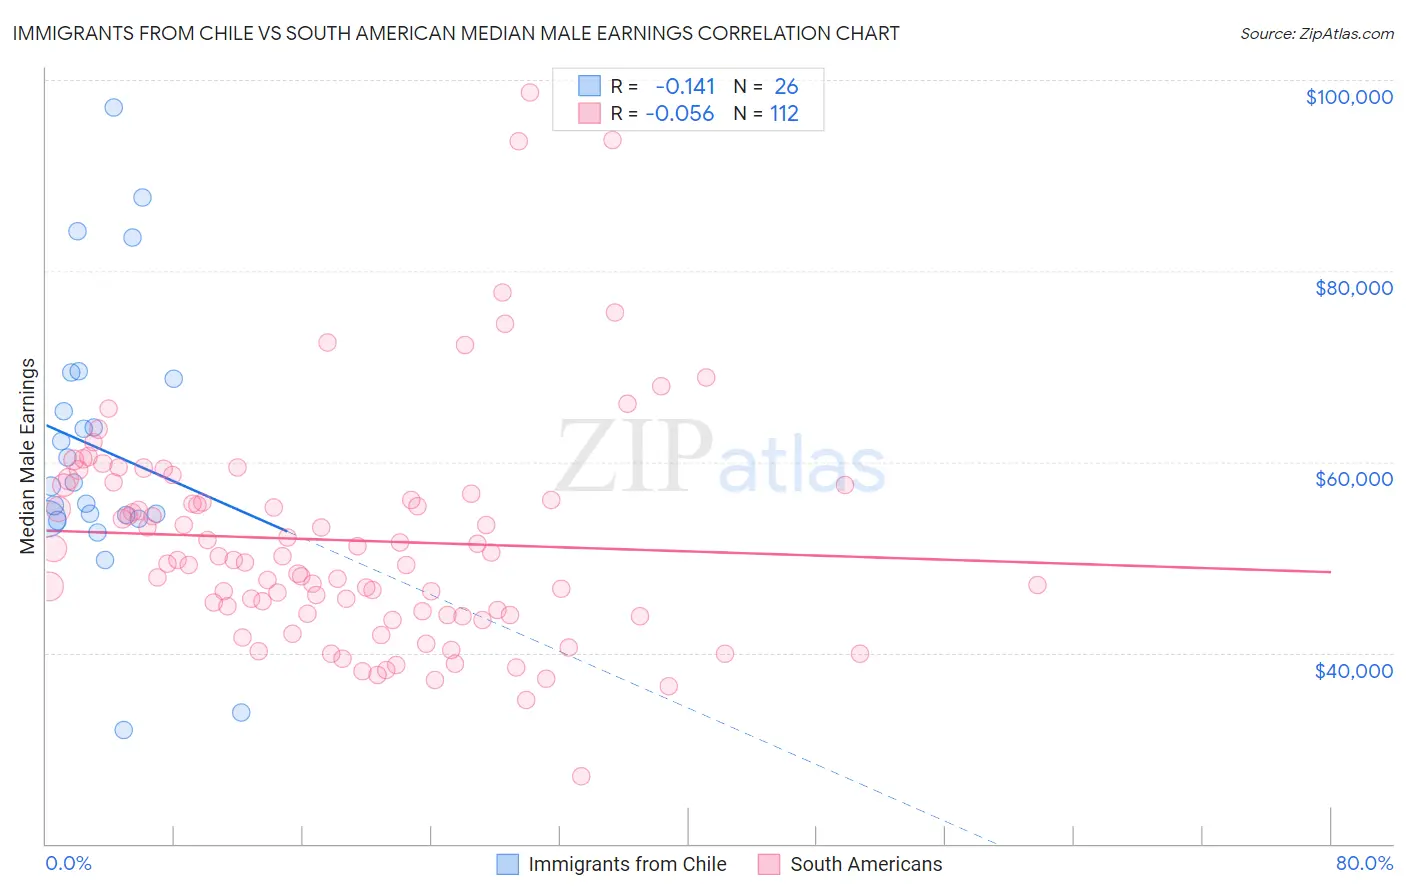 Immigrants from Chile vs South American Median Male Earnings